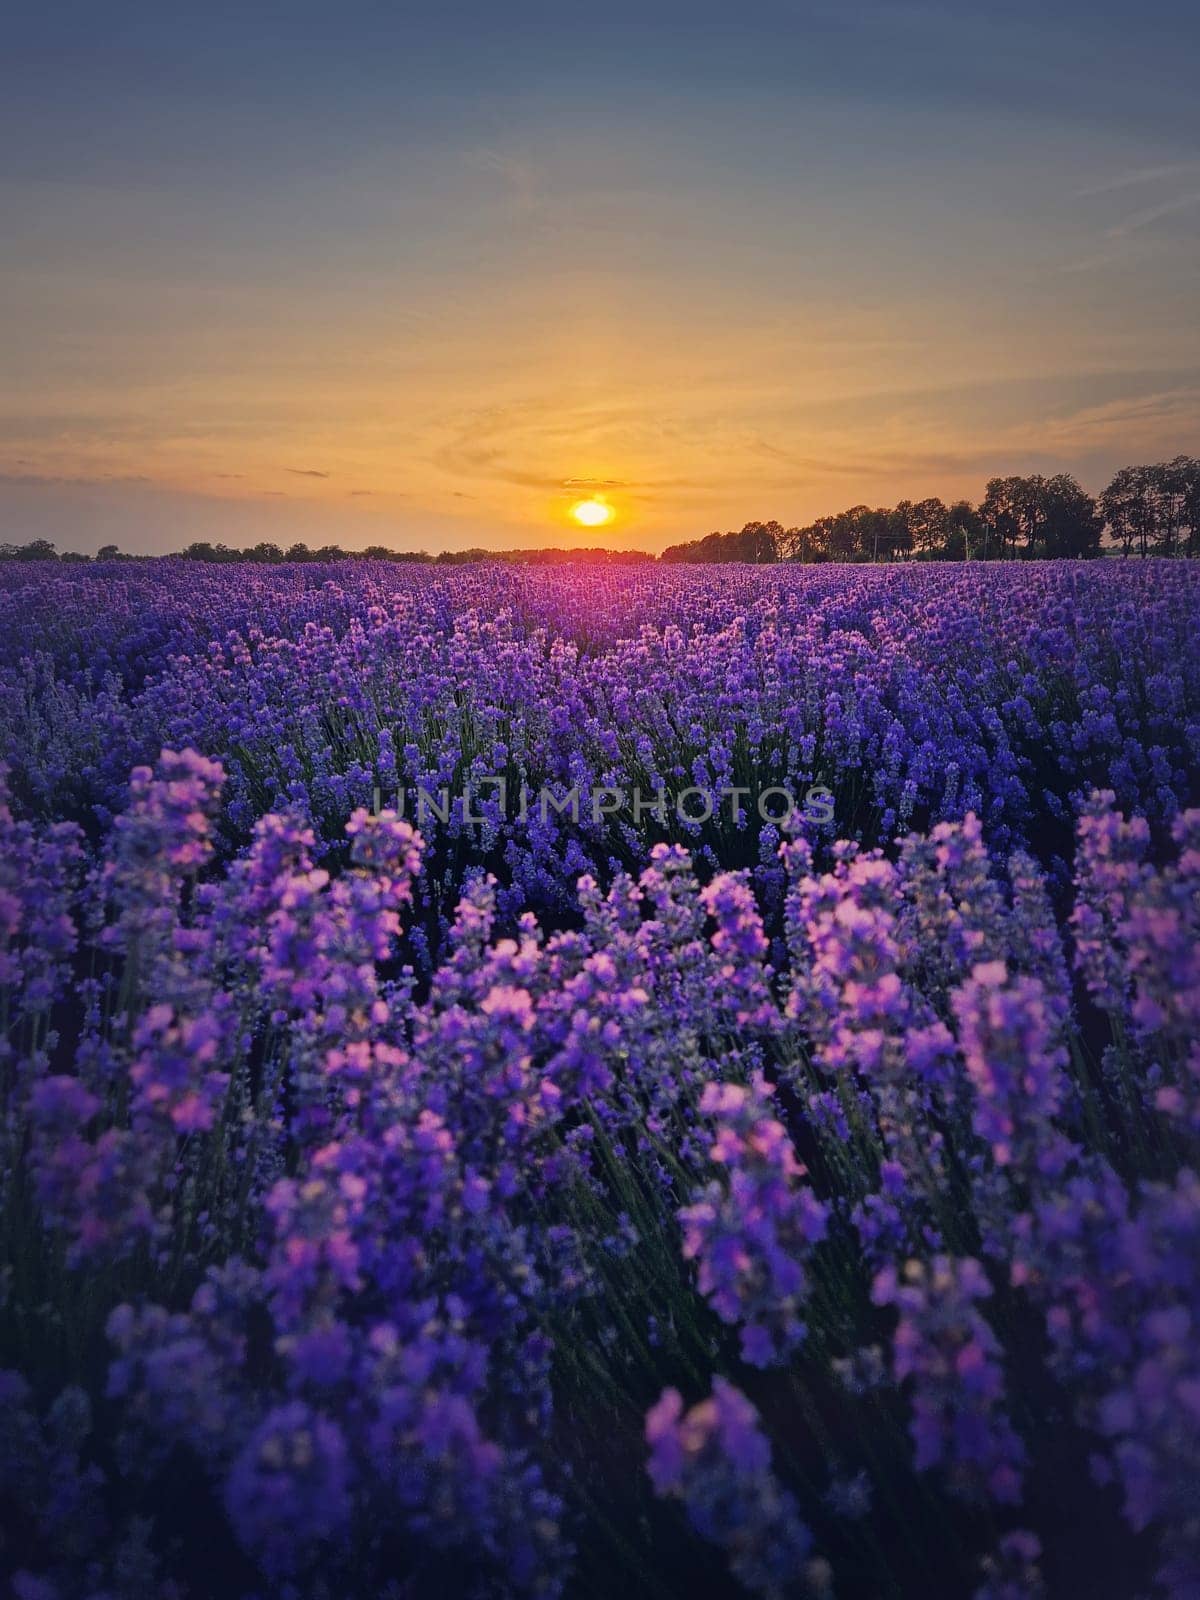 Picturesque scene of blooming lavender field. Beautiful purple pink flowers in warm summer light. Fragrant lavandula plants blossoms in the meadow, vertical background by psychoshadow